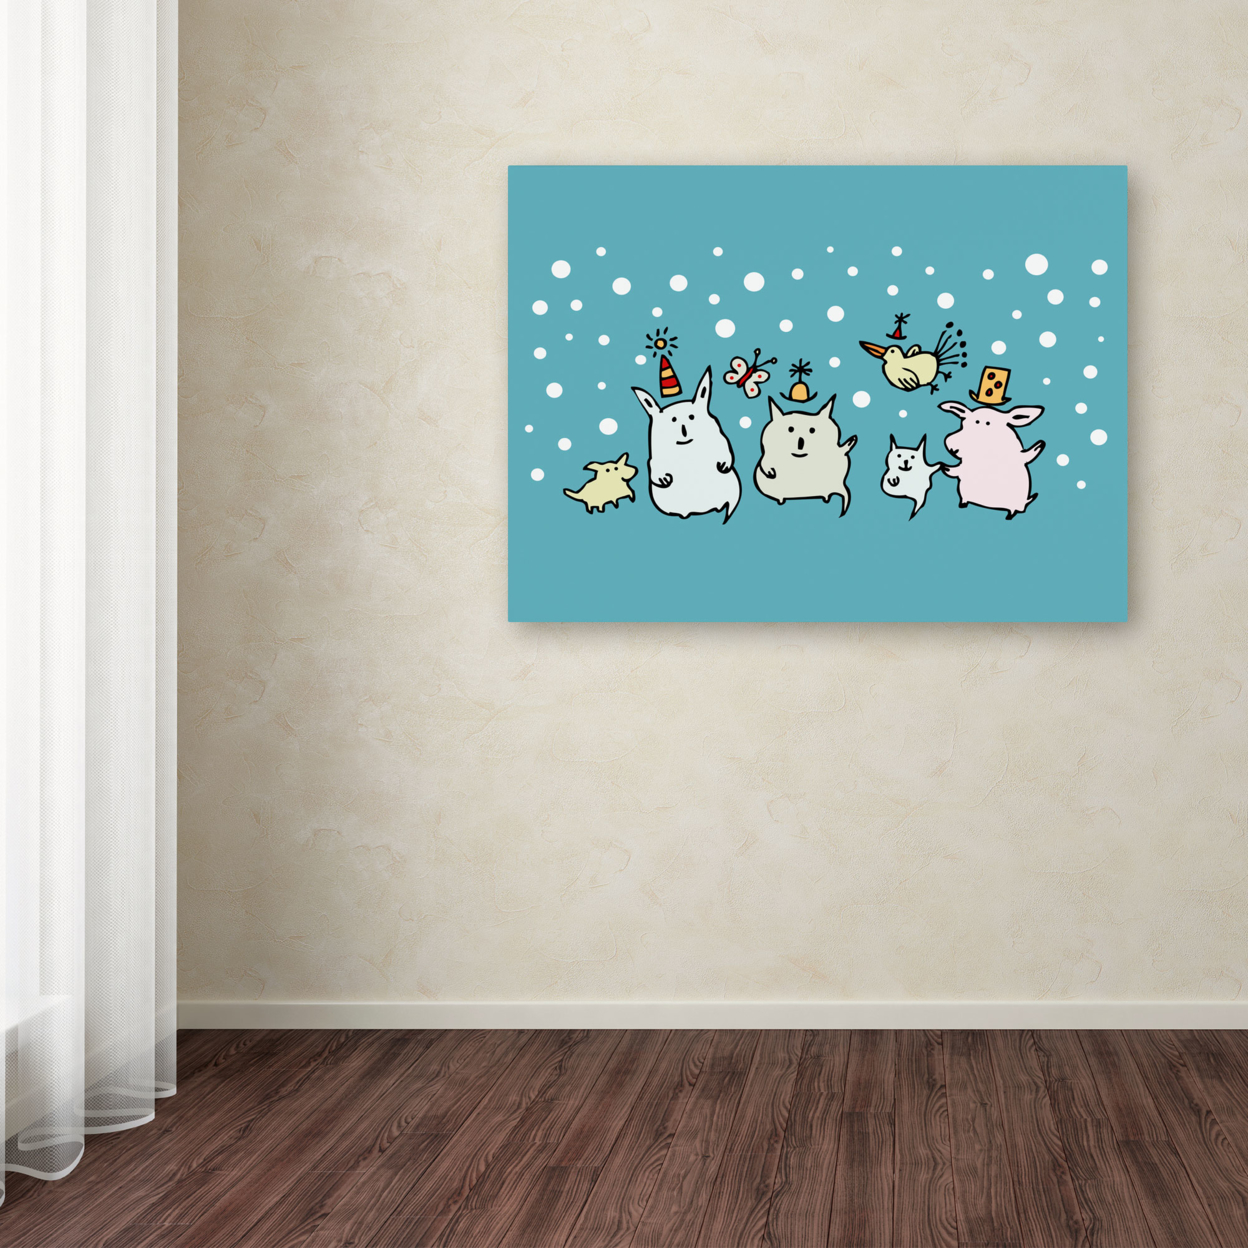 Carla Martell 'Christmas Creatures In Blue' Canvas Art 18 X 24